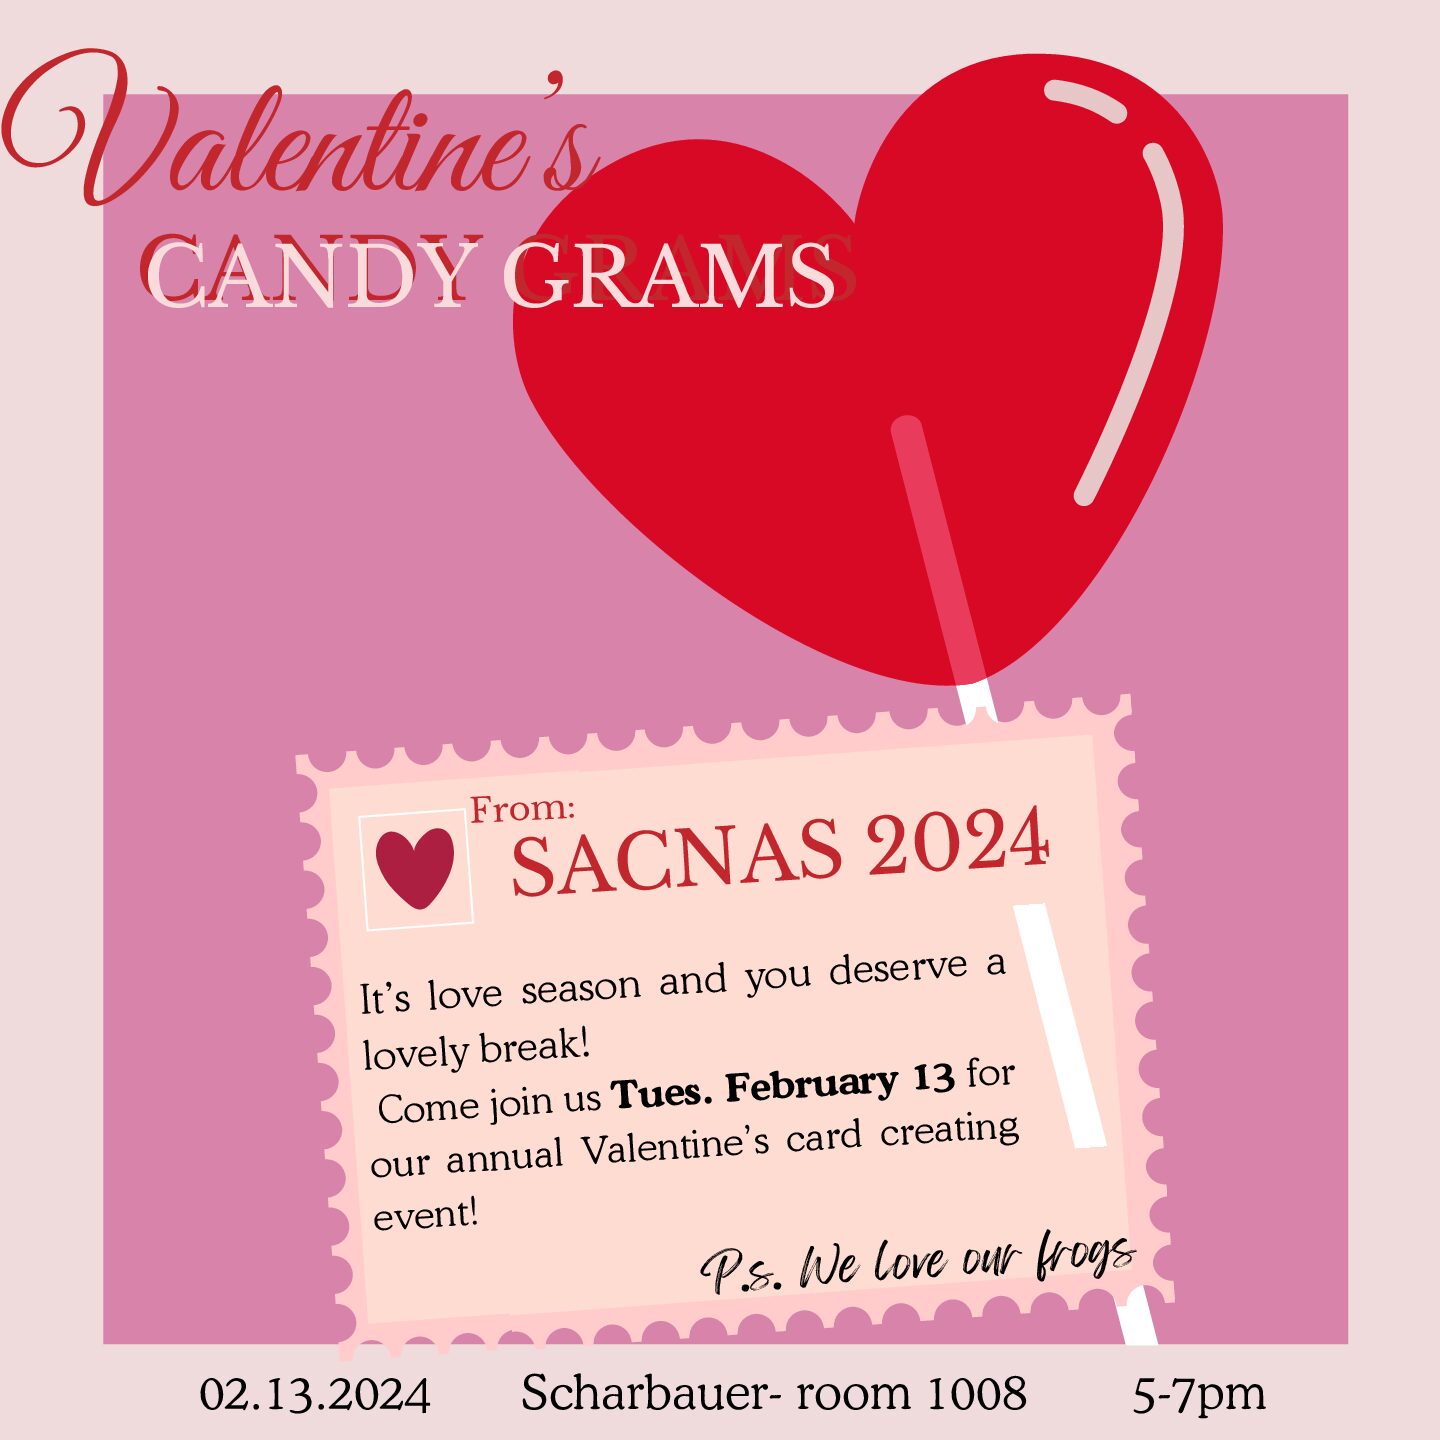 Its love season! Come gift your other-half a candy gram and join us Tues. Febuary 13 for our card decorating event!